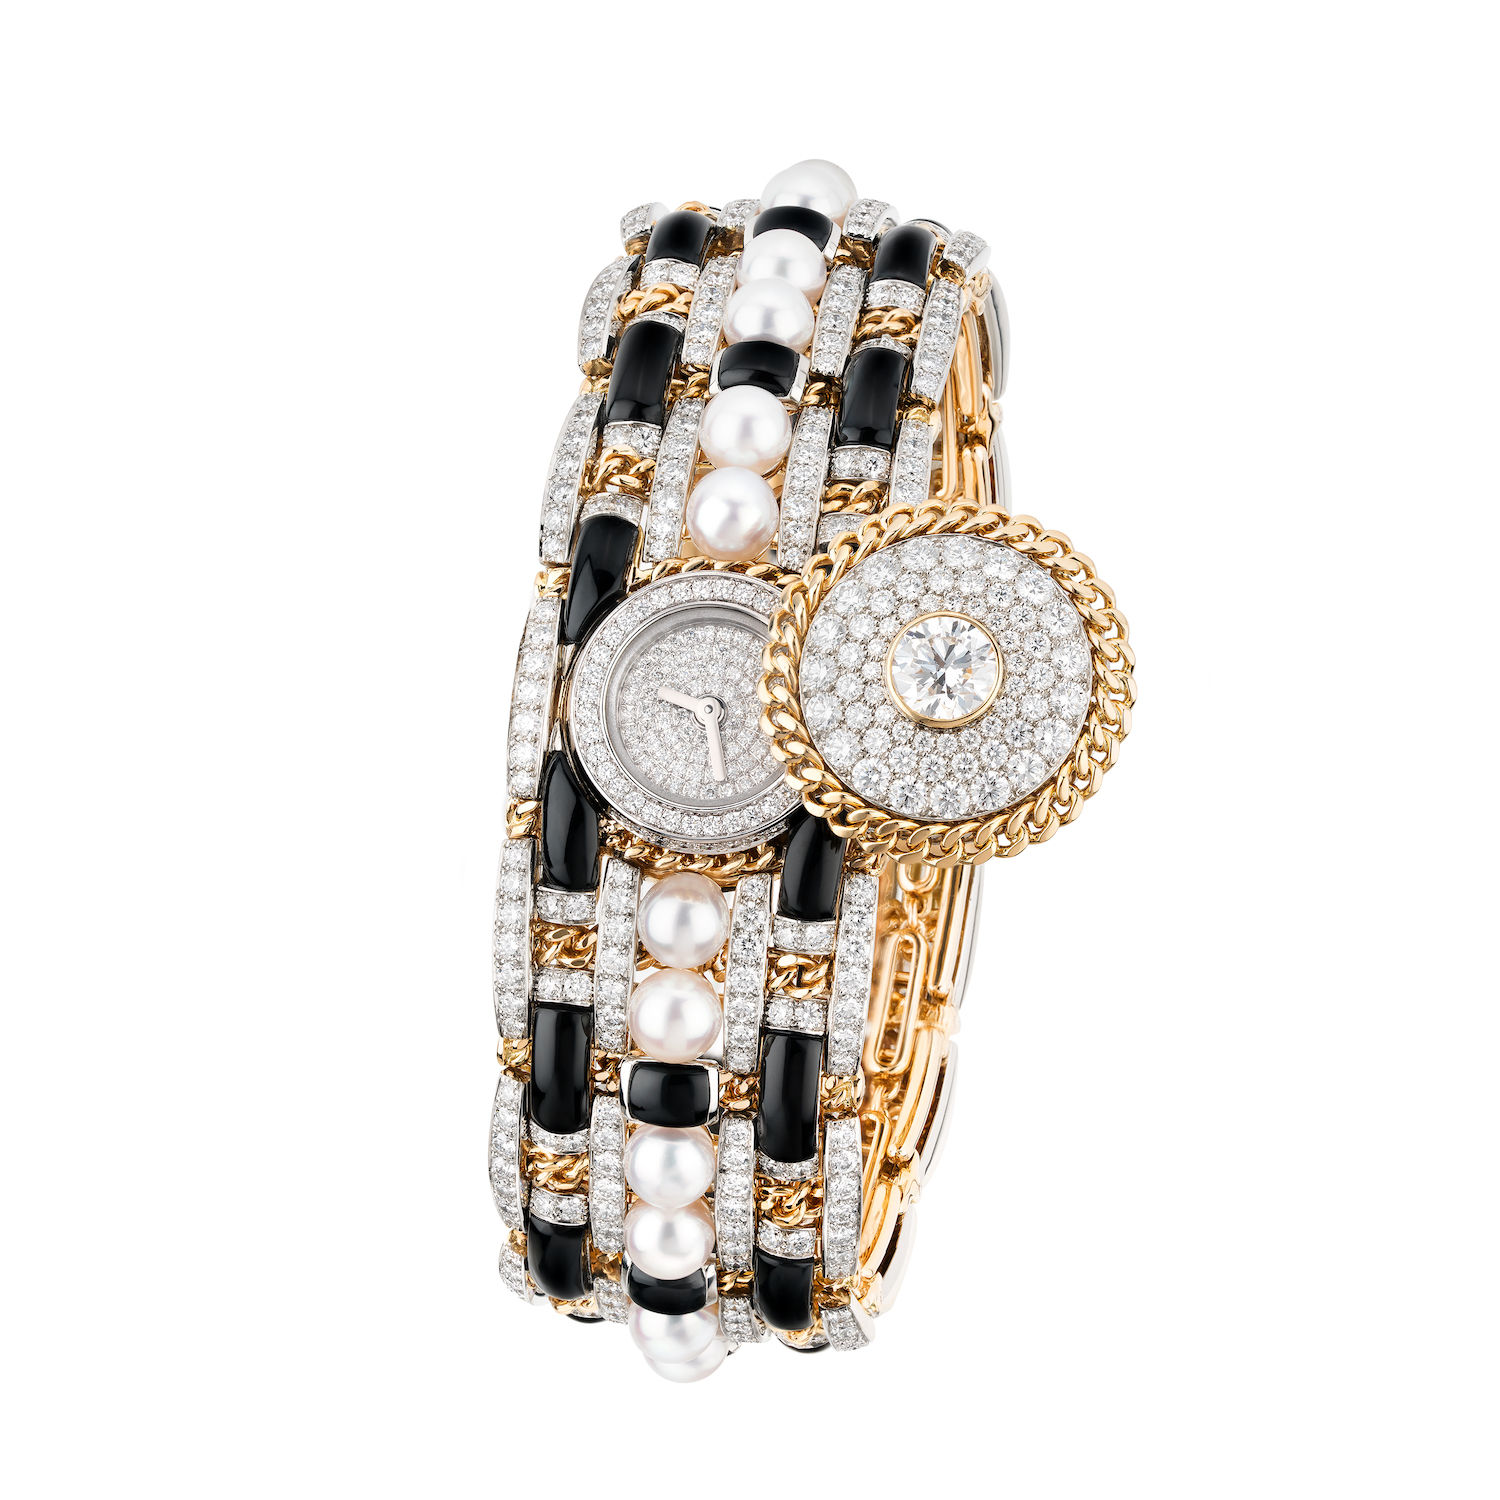 Chanel unveils a high jewellery collection inspired by tweed